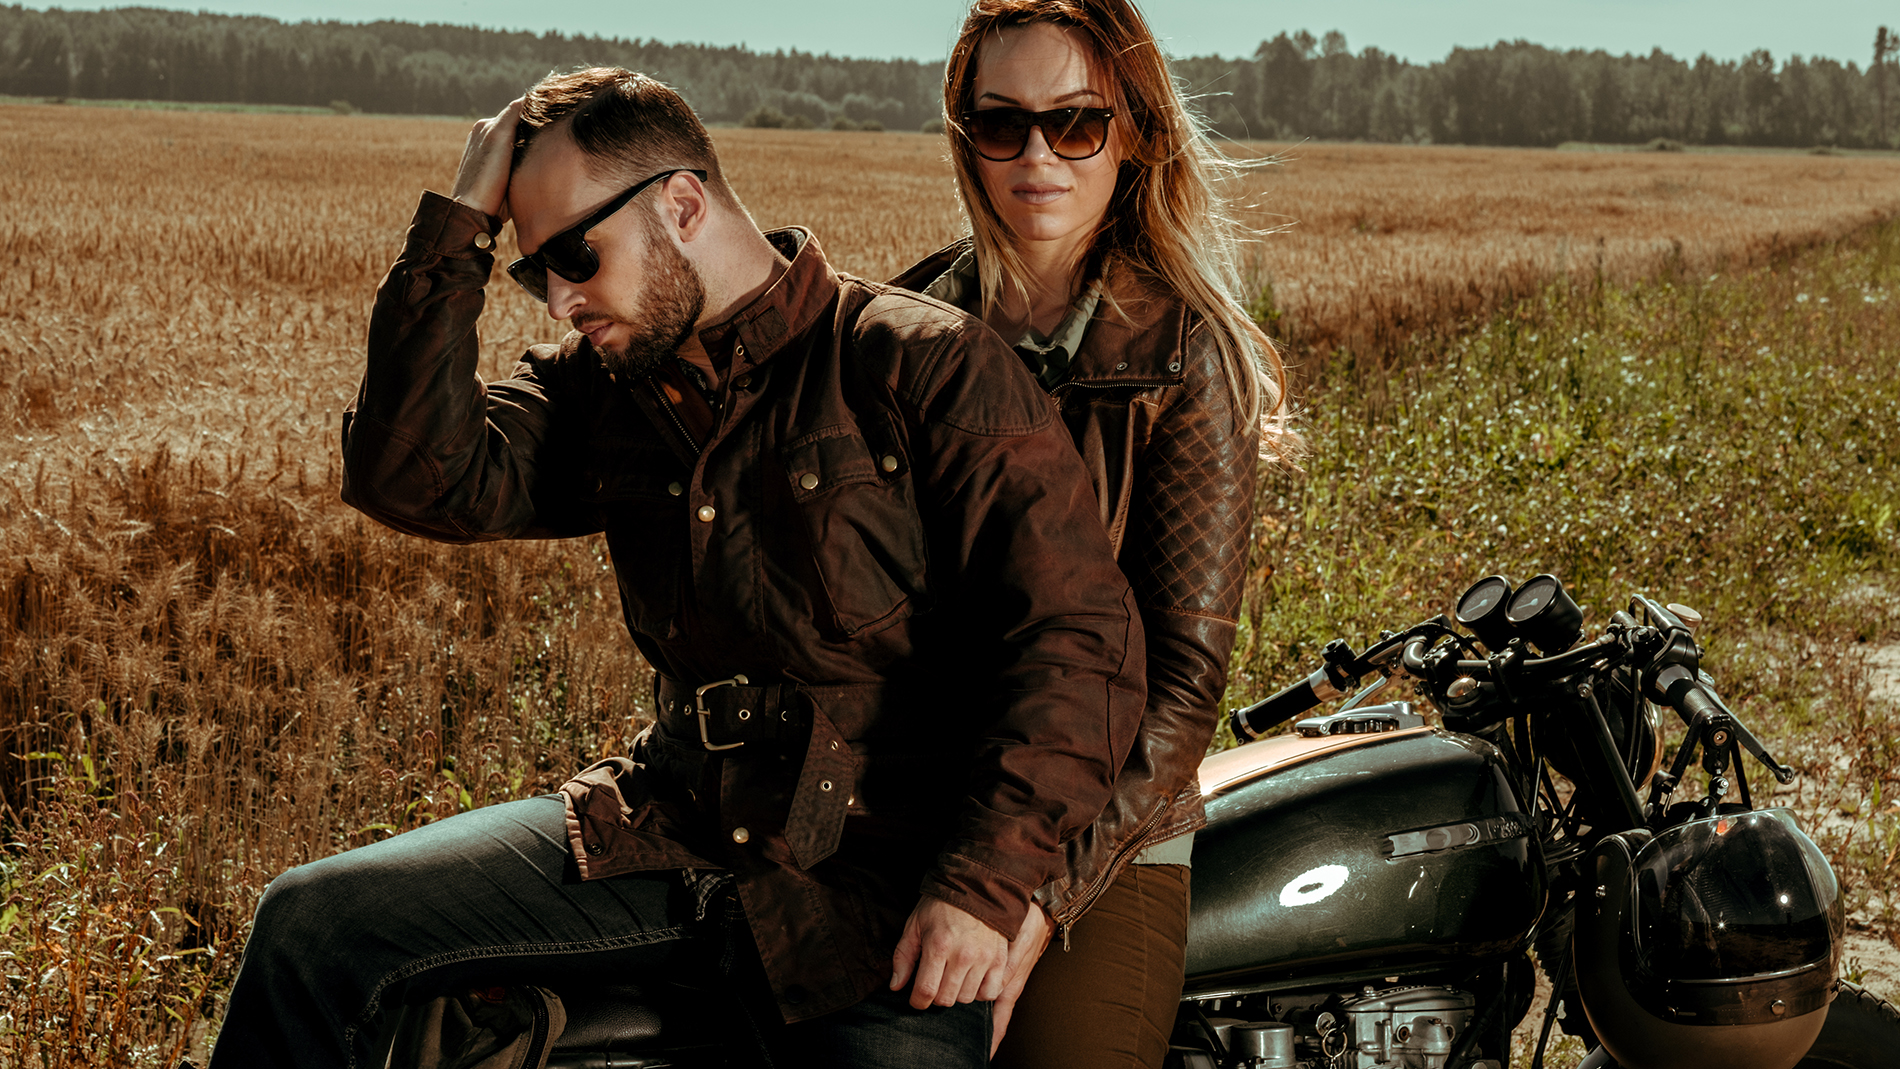 Couple and cafe racer motorcycle